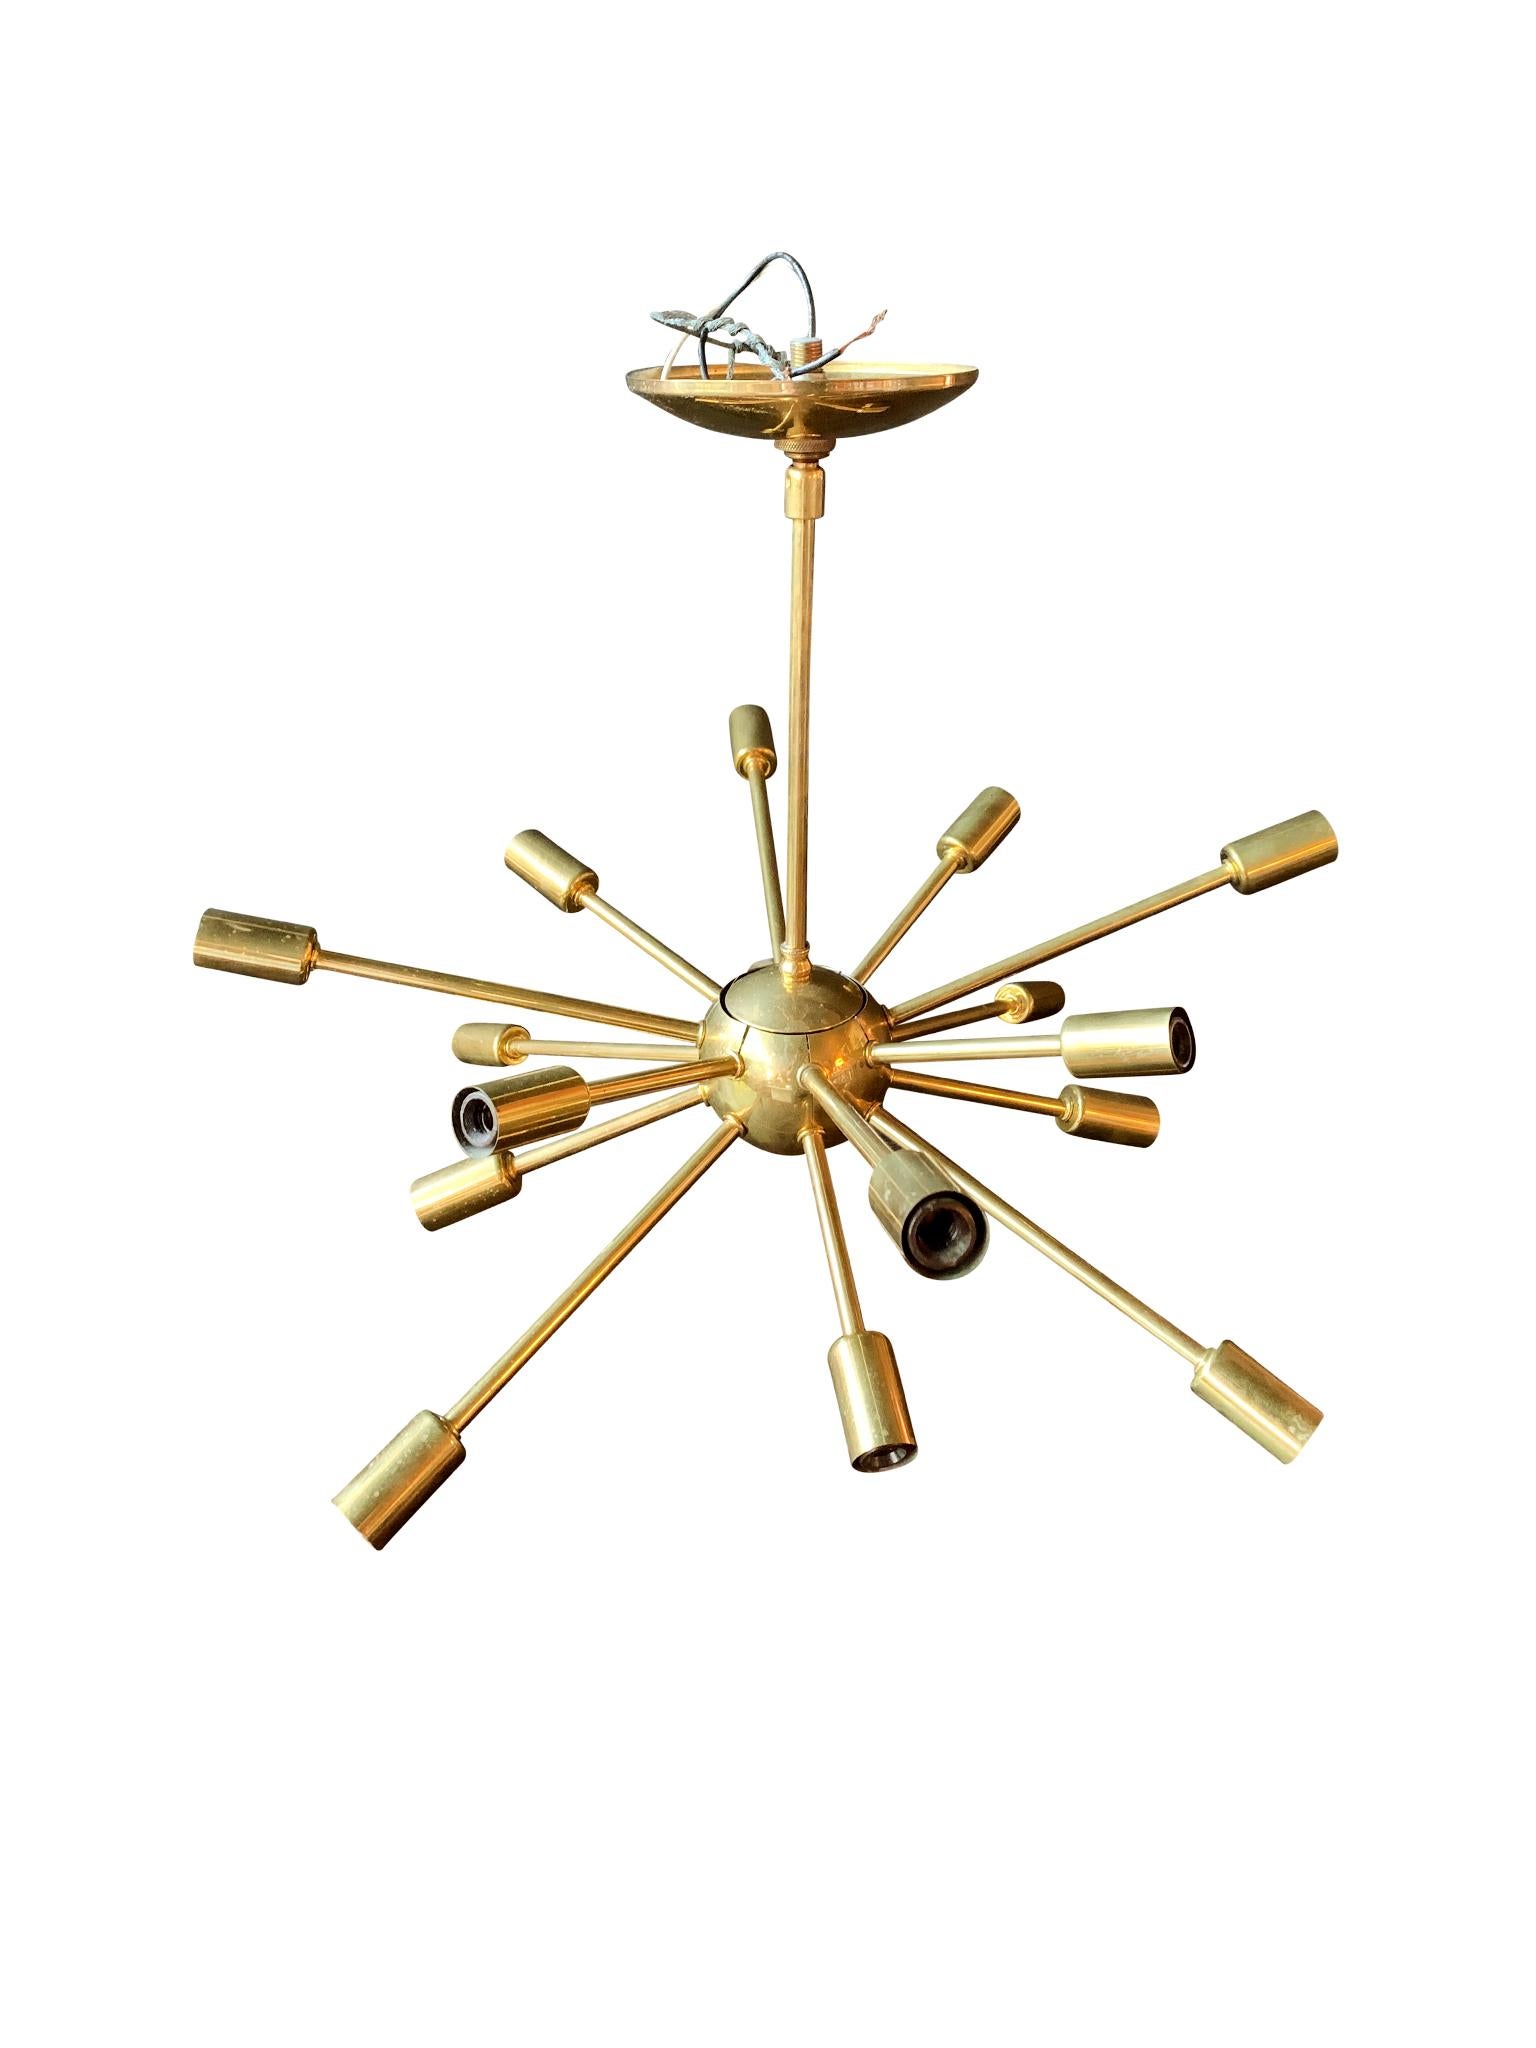 A classic Midcentury Sputnik brass chandelier. It consists of 16 arms radiating, each culminating in a single bulb socket.

Dimensions:
20 in. diameter
15.75 in. height

Condition notes:
In good condition. General wear consistent with the